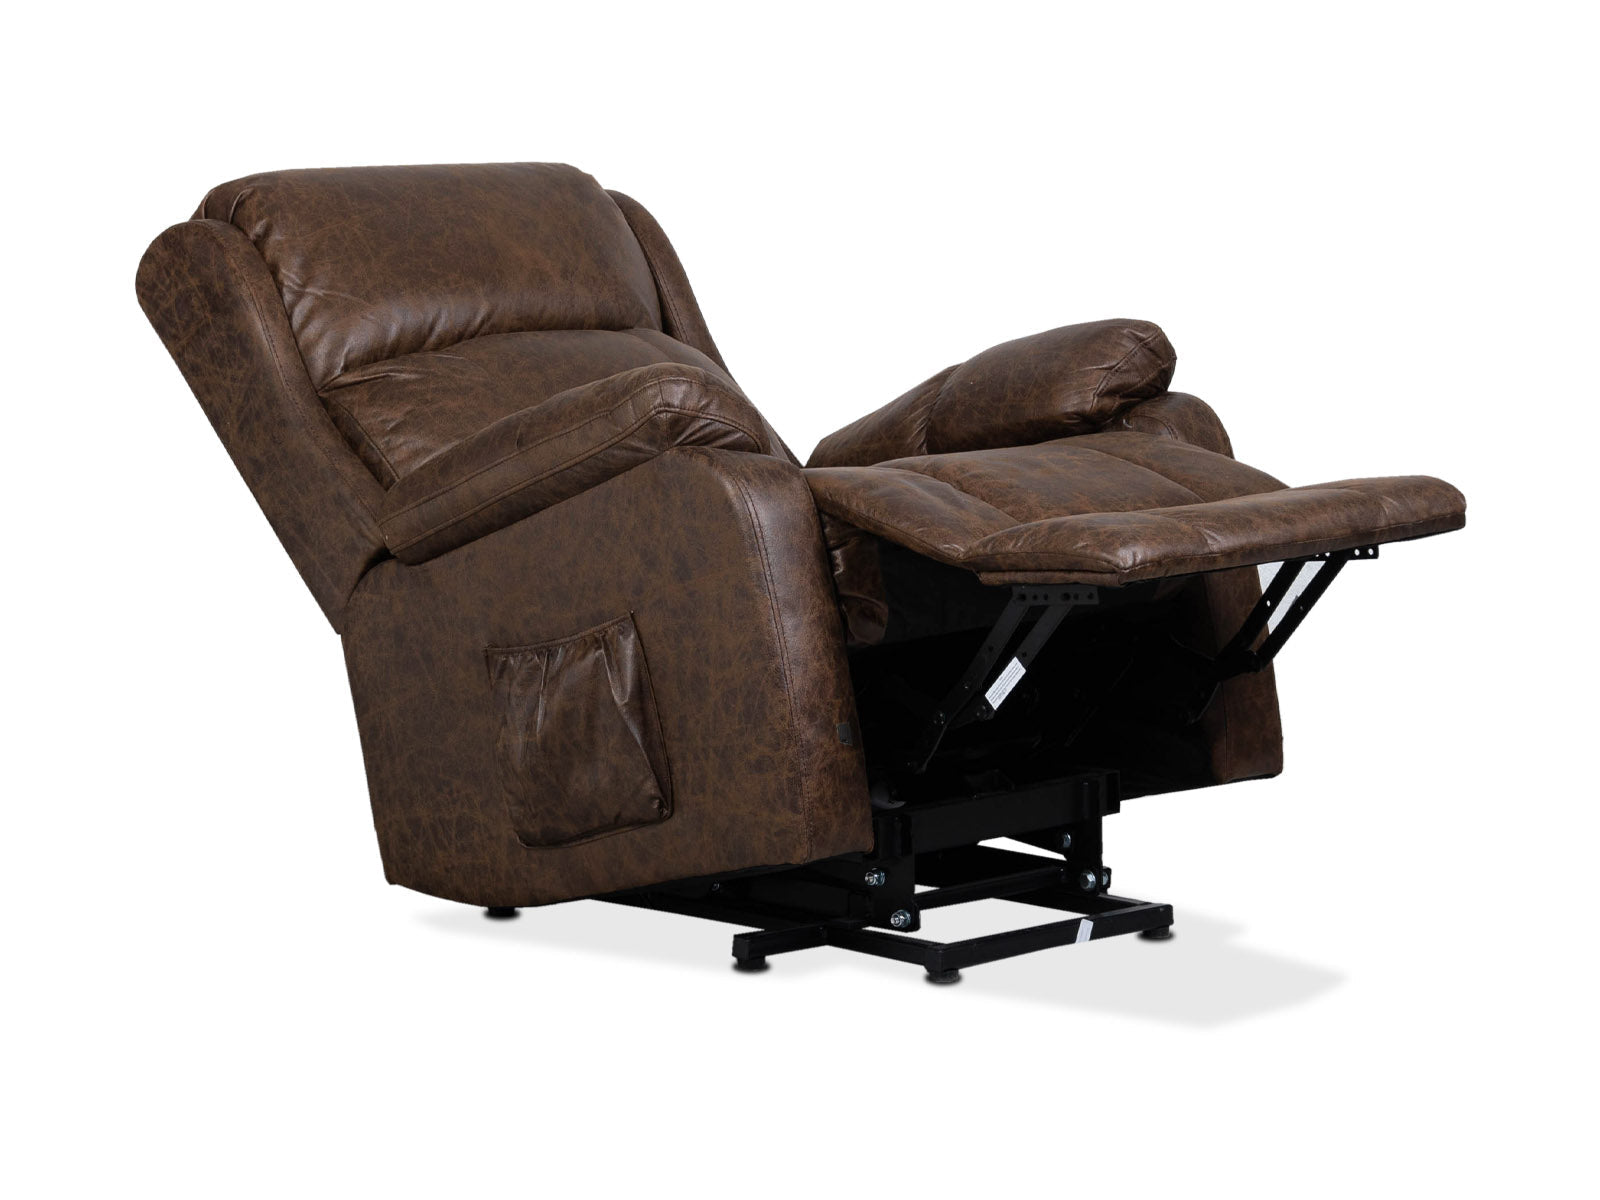 Recliner Chiscris Power Lift #Color_SaddleBrown "3329"